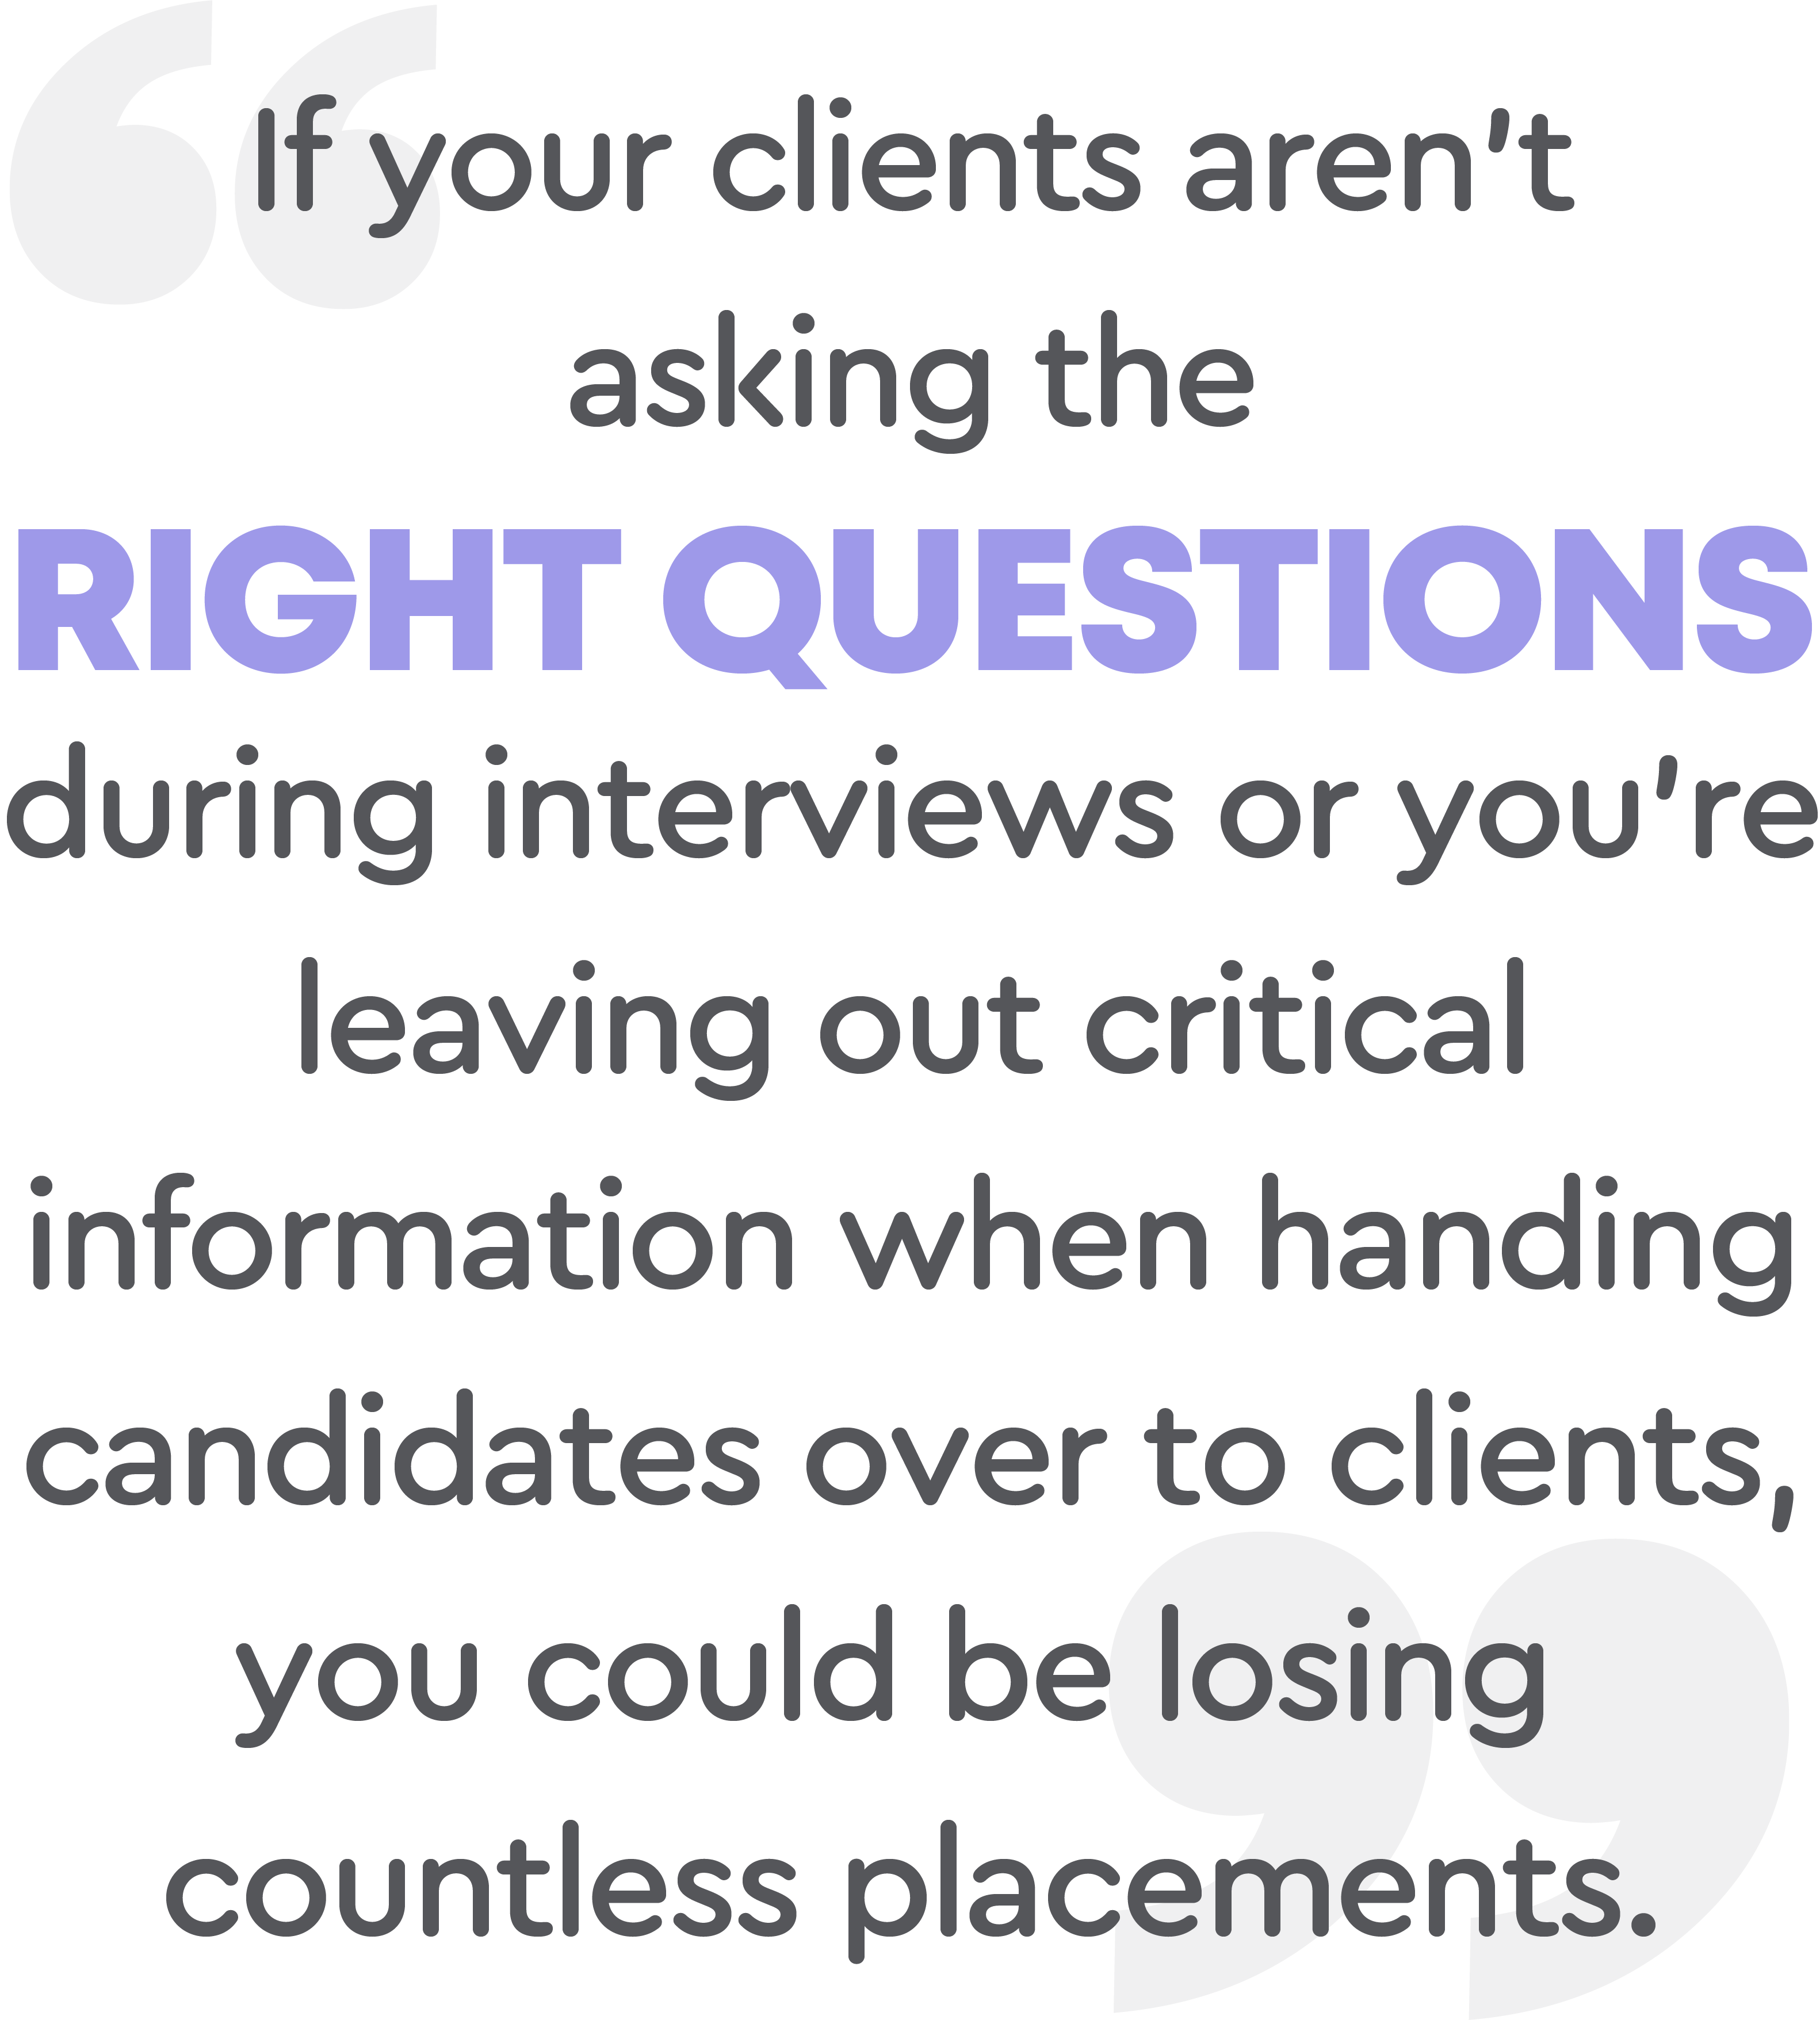 If your clients aren't asking the right questions, you could be losing countless placements pull quote